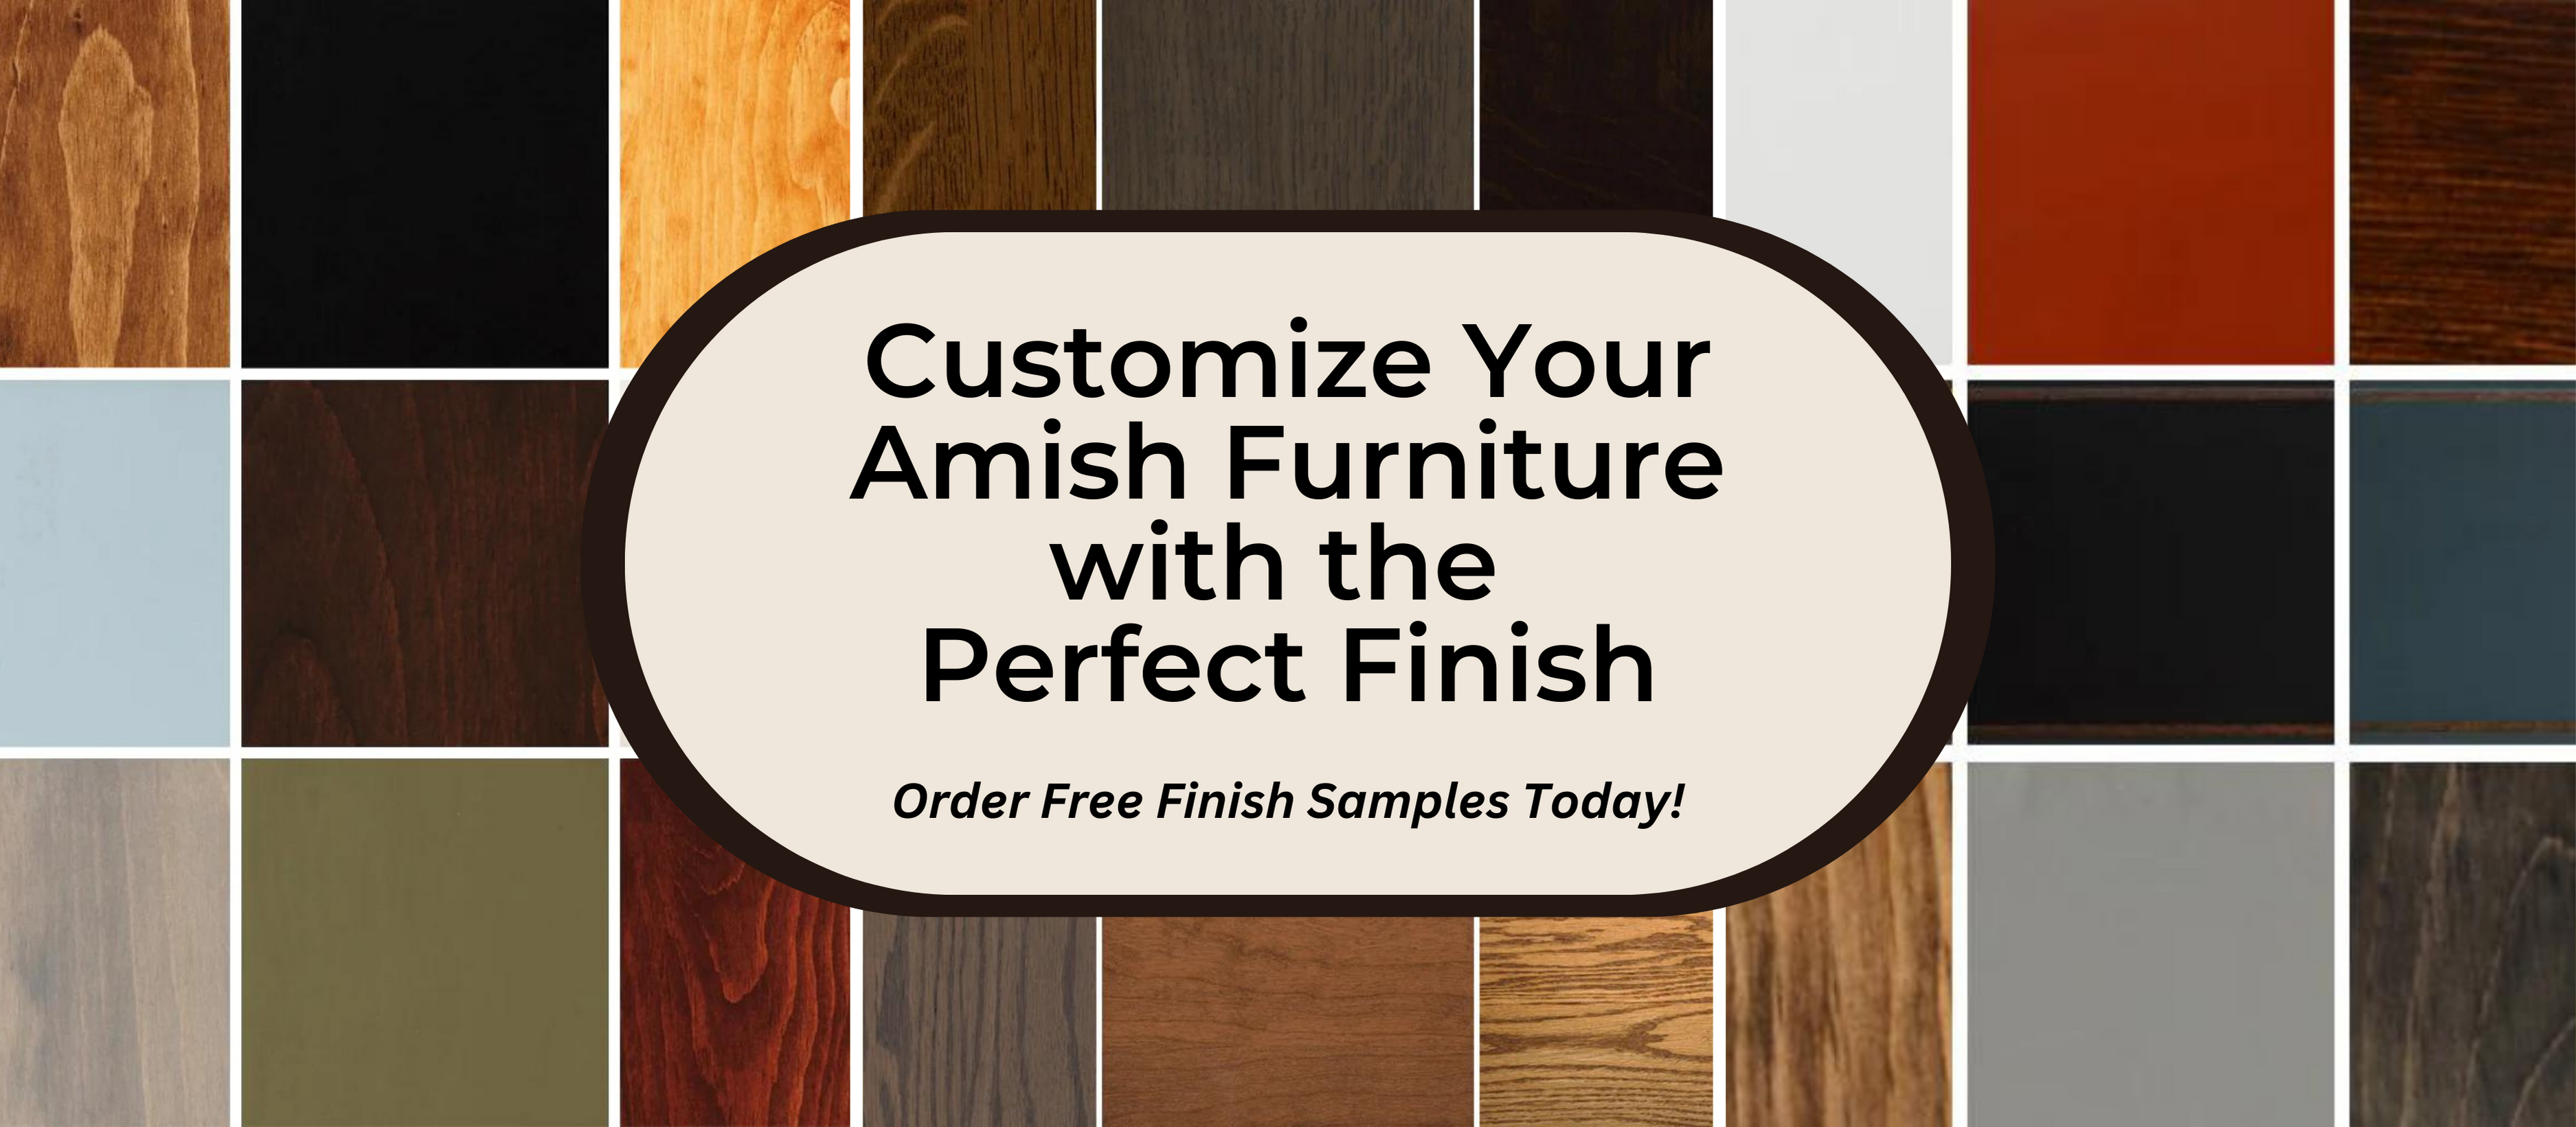 Have You Ordered Your FREE Finish Samples?